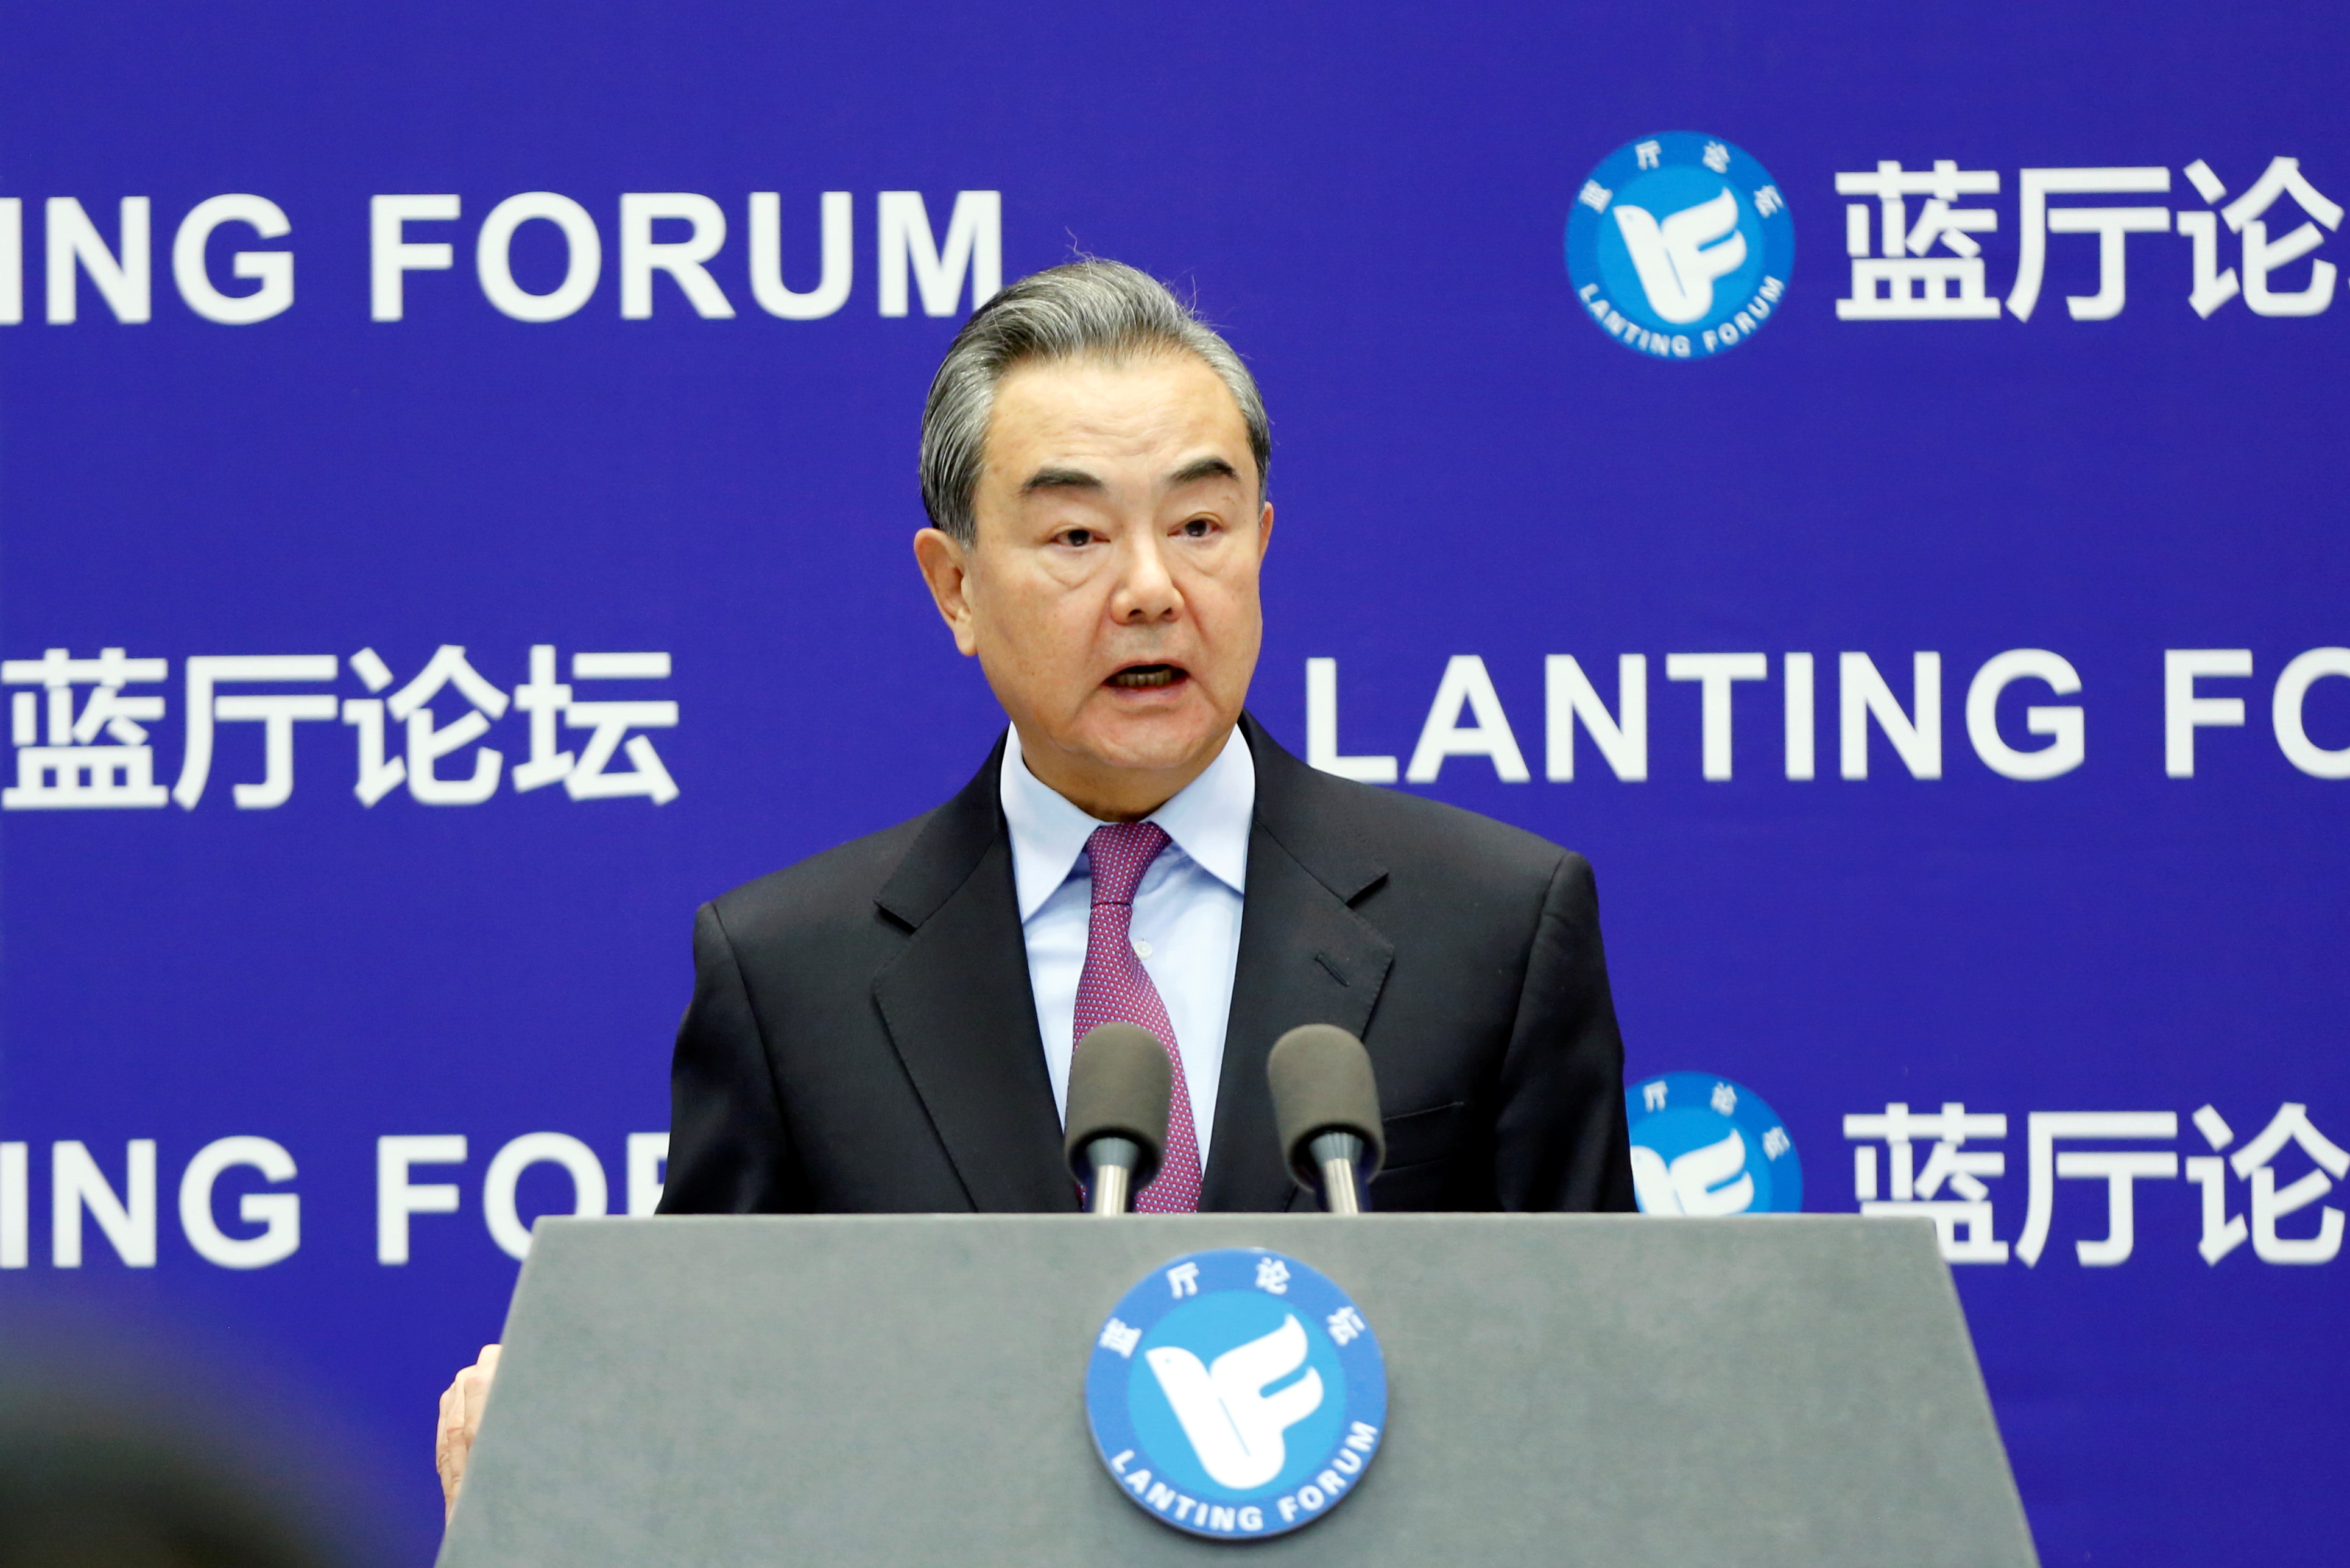 Chinese State Councilor and Foreign Minister Wang Yi at the Lanting Forum in Beijing